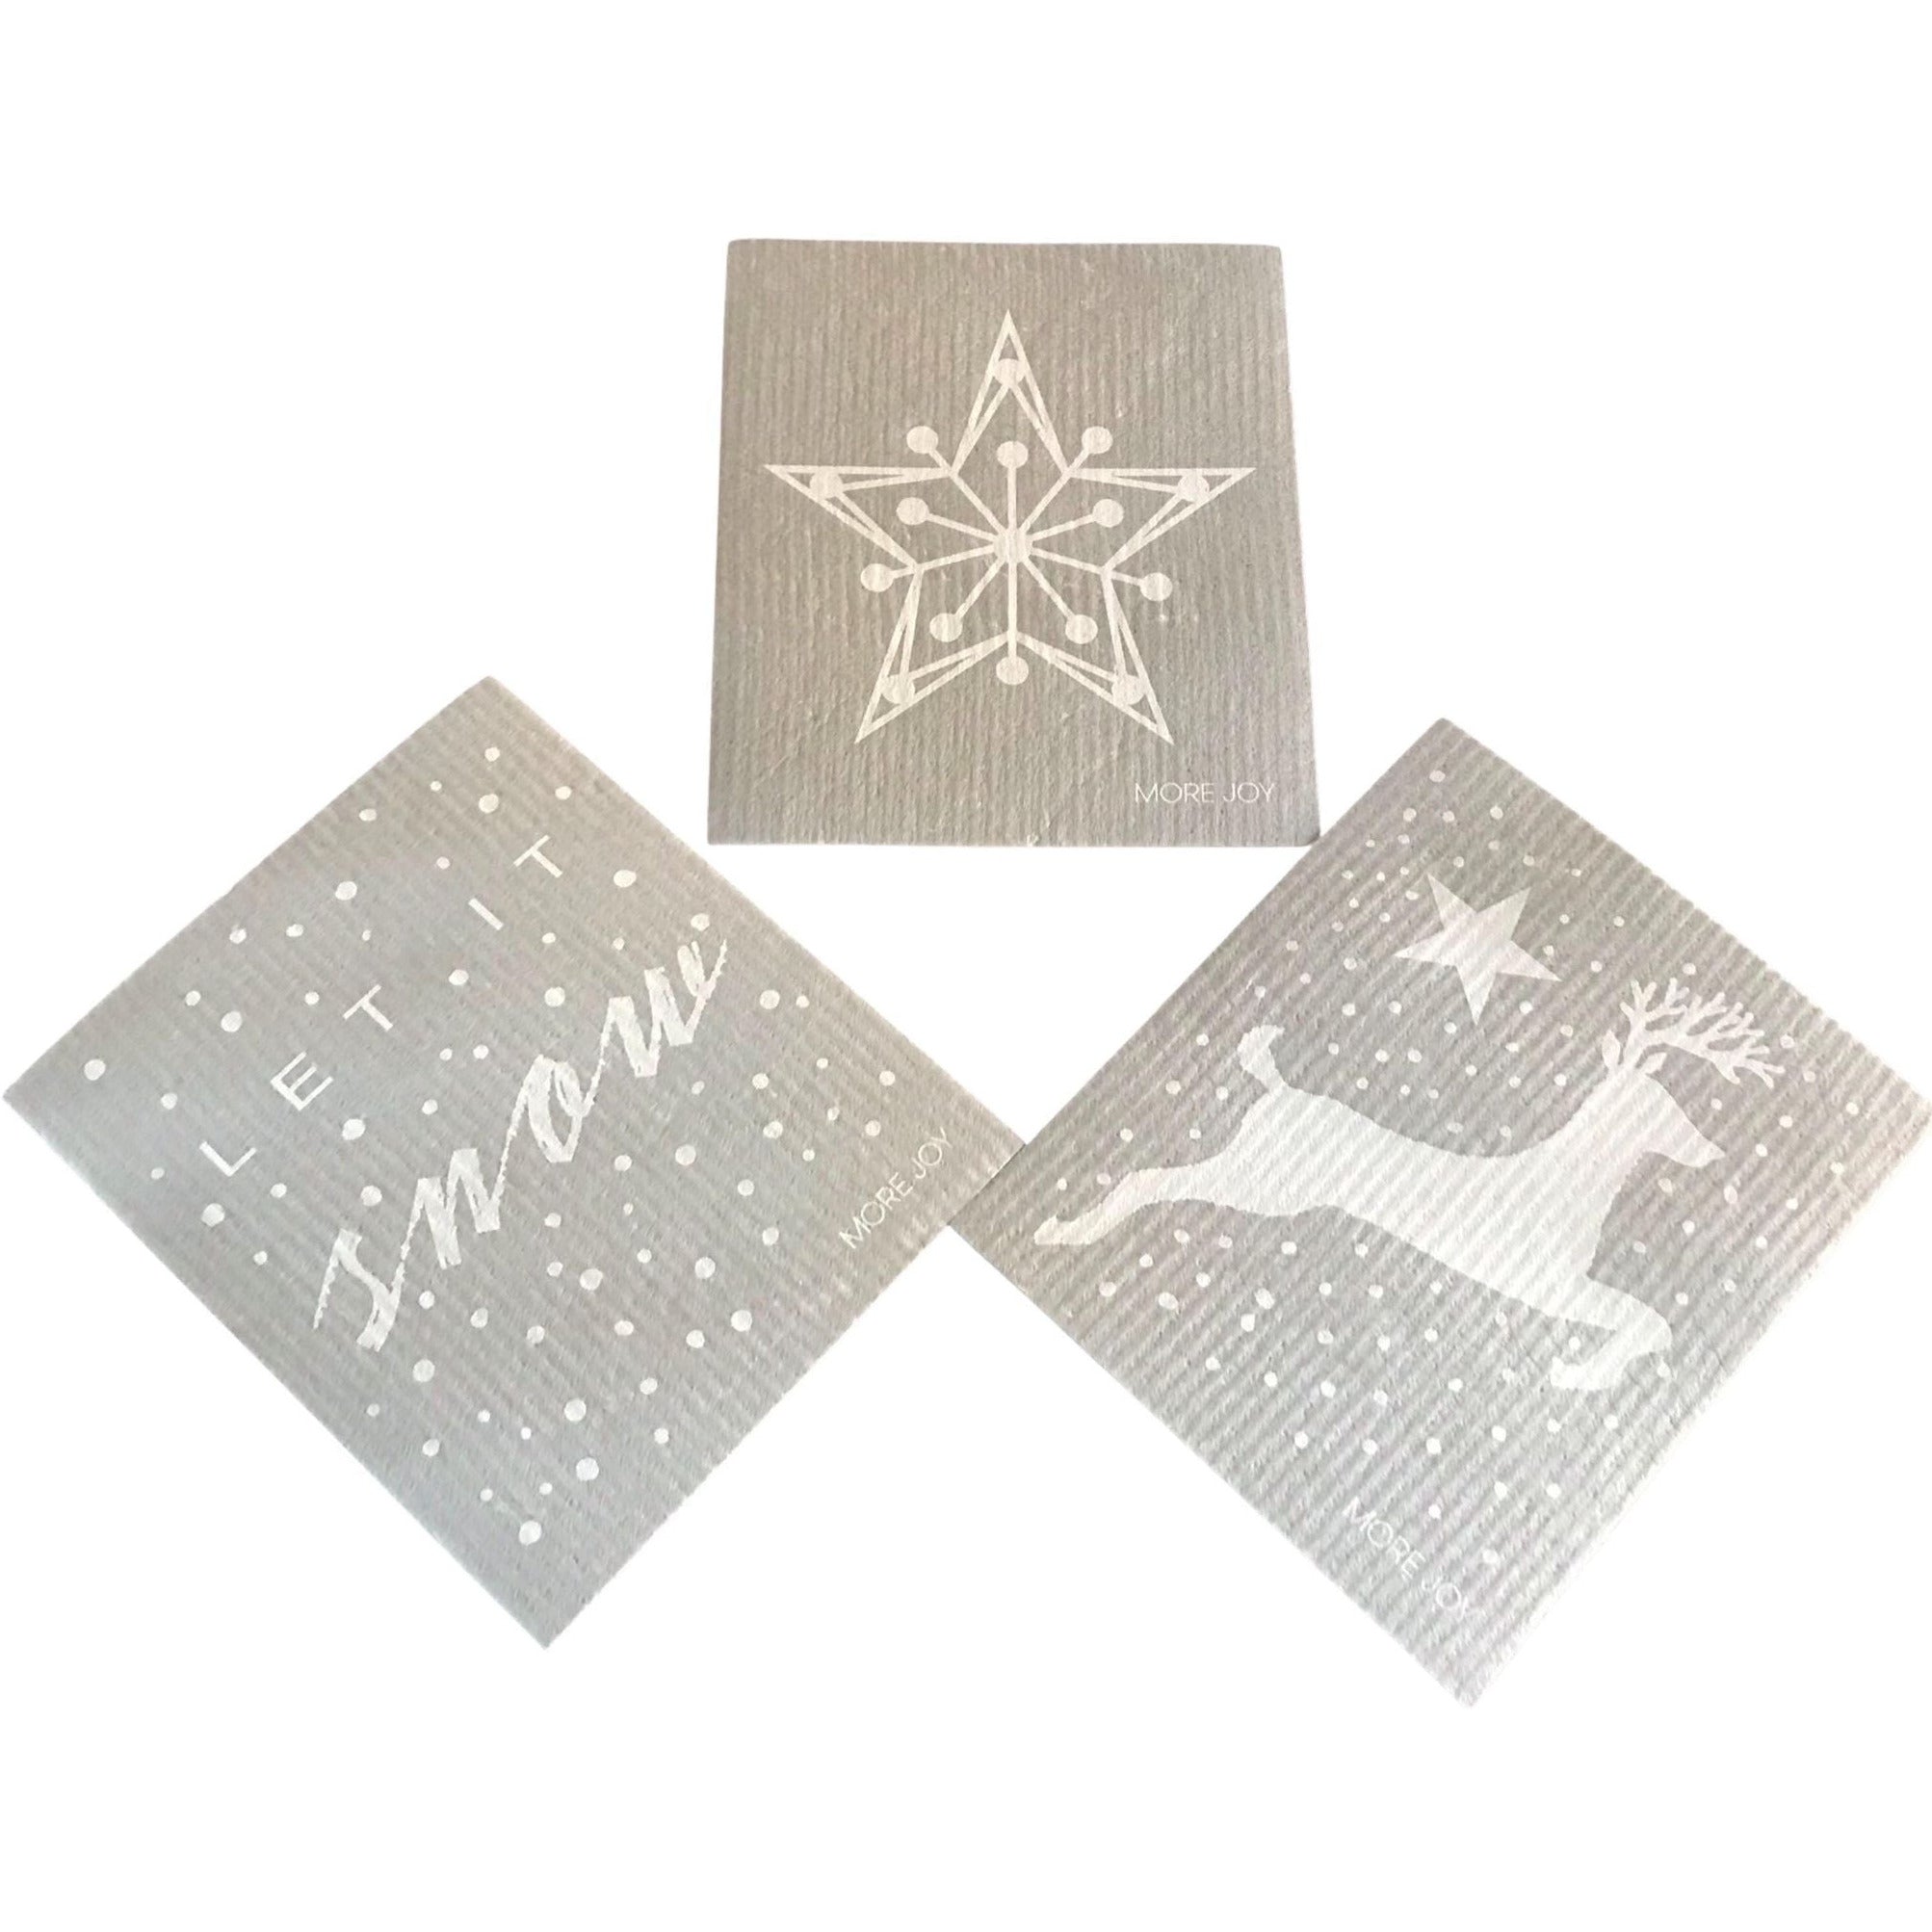 Introducing our charming Christmas Snow Swedish Dish Cloths - Set of 3, your ultimate partners for a wide array of household tasks, from tackling spills to adding a gleaming finish to surfaces. This set features three enchanting designs - Let It Snow, Star of Pearls, and Reindeer in Snow, each bringing a touch of winter wonder to your home.